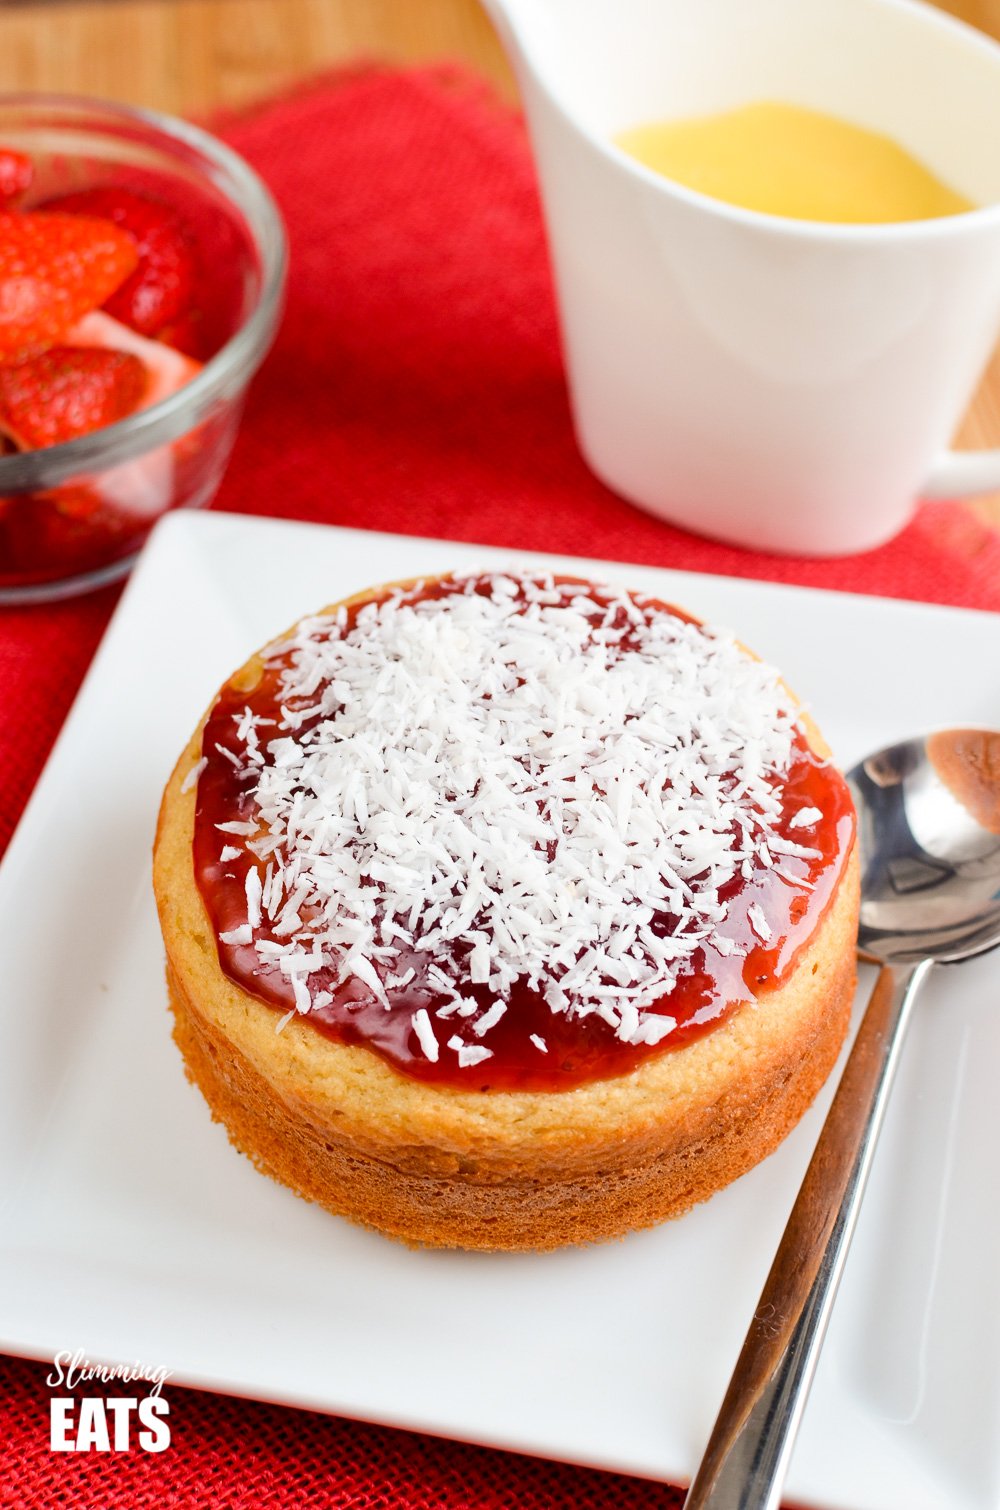 jam and coconut sponge cake on a white plate with spoon.